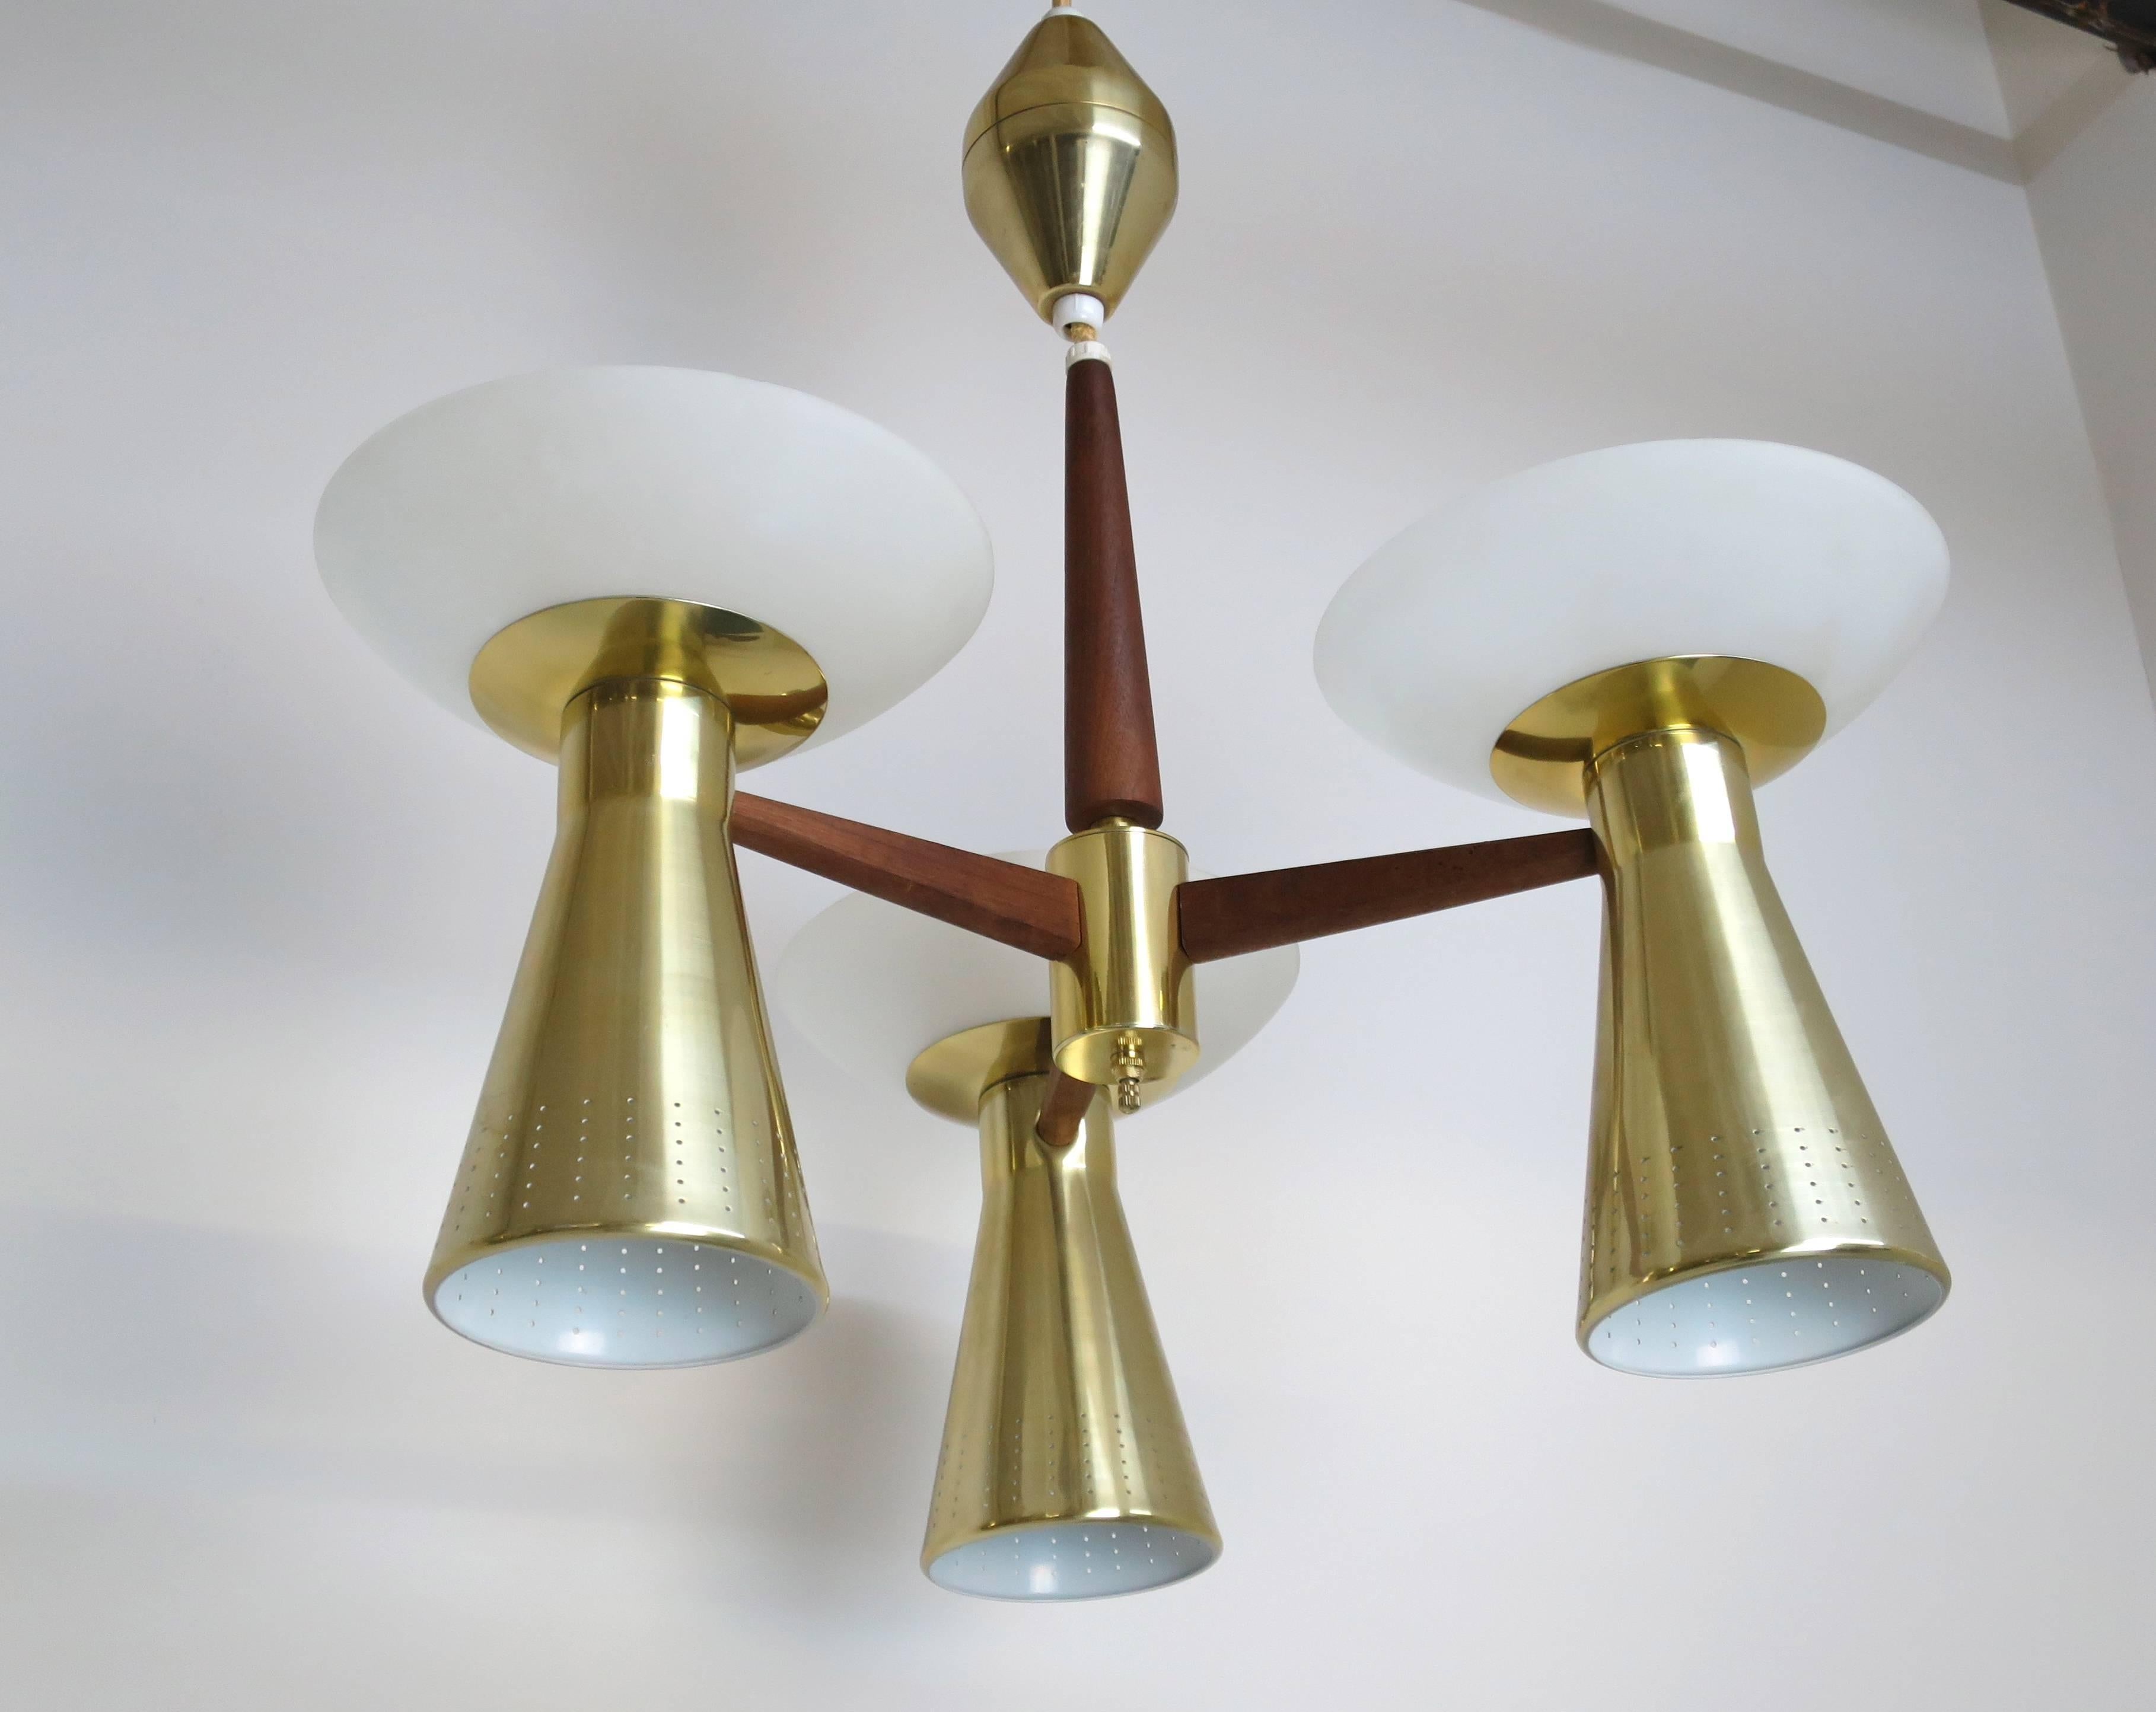 Modernist perforated brass and walnut chandelier features three double sconces. Sockets on both the bottom and top (Six bulbs total with three-way switch). Fixture has been professionally rewired.
Fixture is 22